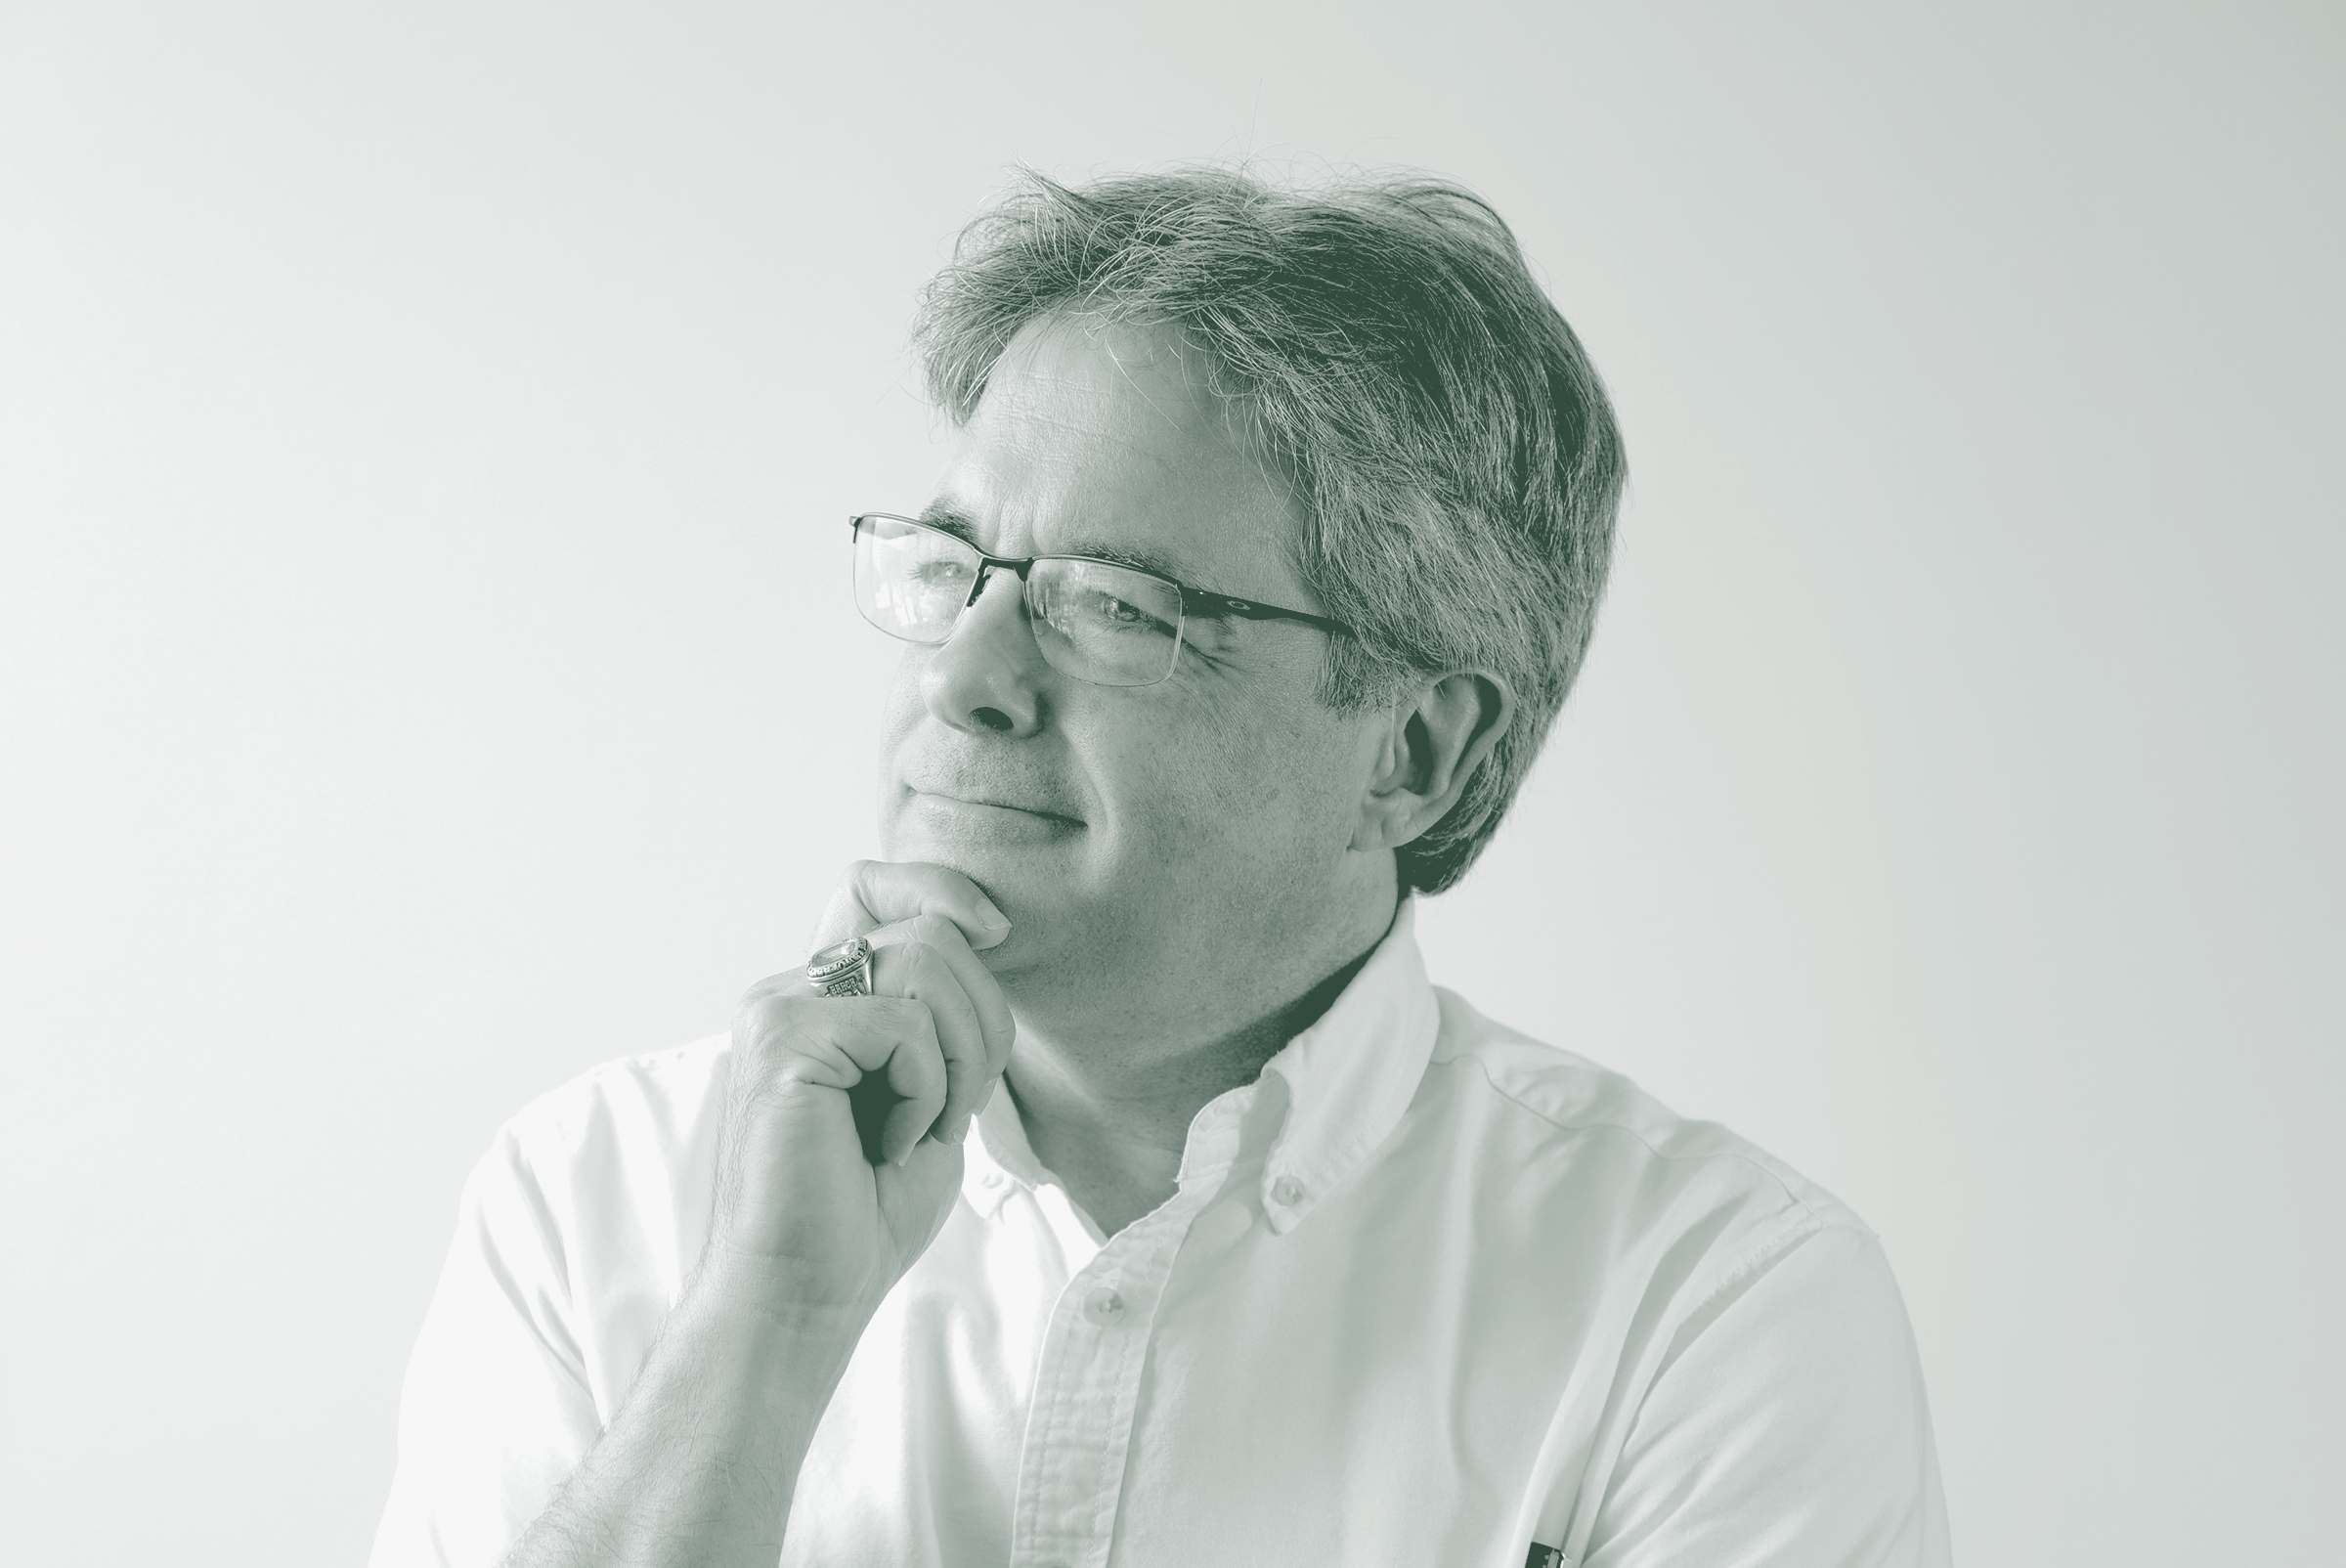 A black and white portrait of Scott Kanaga, an Associate Principal and Studio Director with GFF in the Retail Studio, in front of a white background.